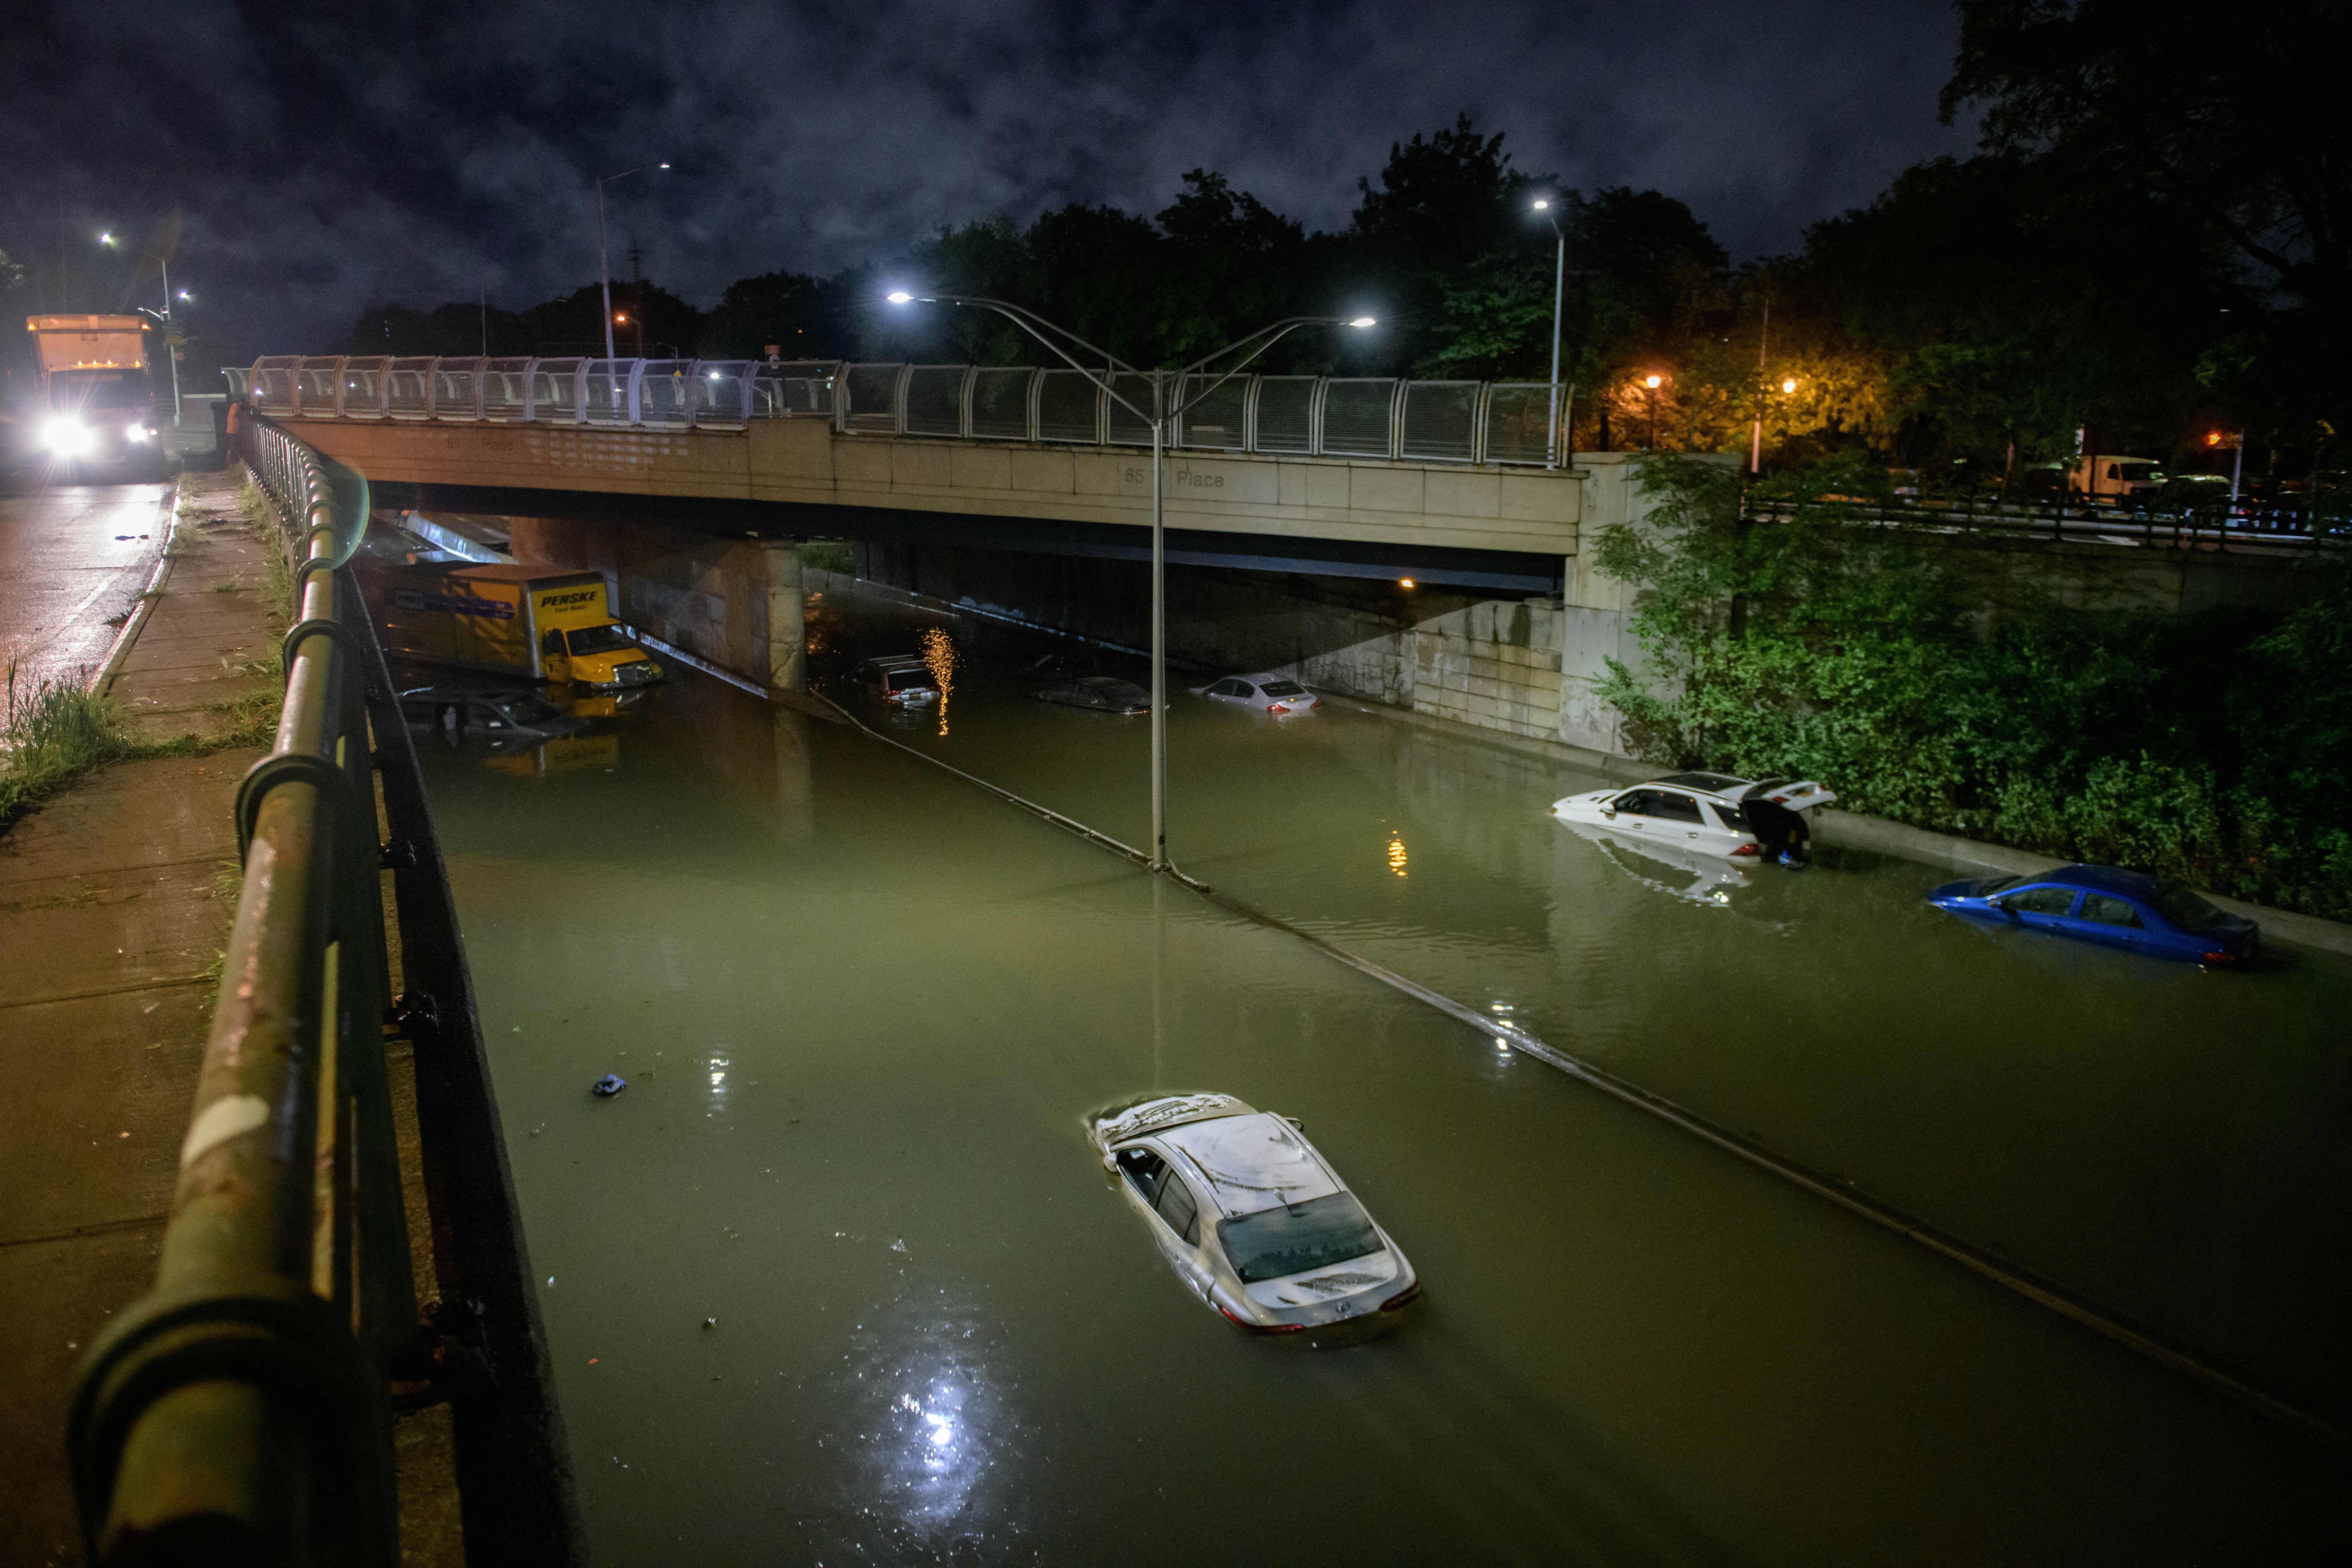 Floodwater surrounds vehicles following heavy rain on an expressway in Brooklyn.